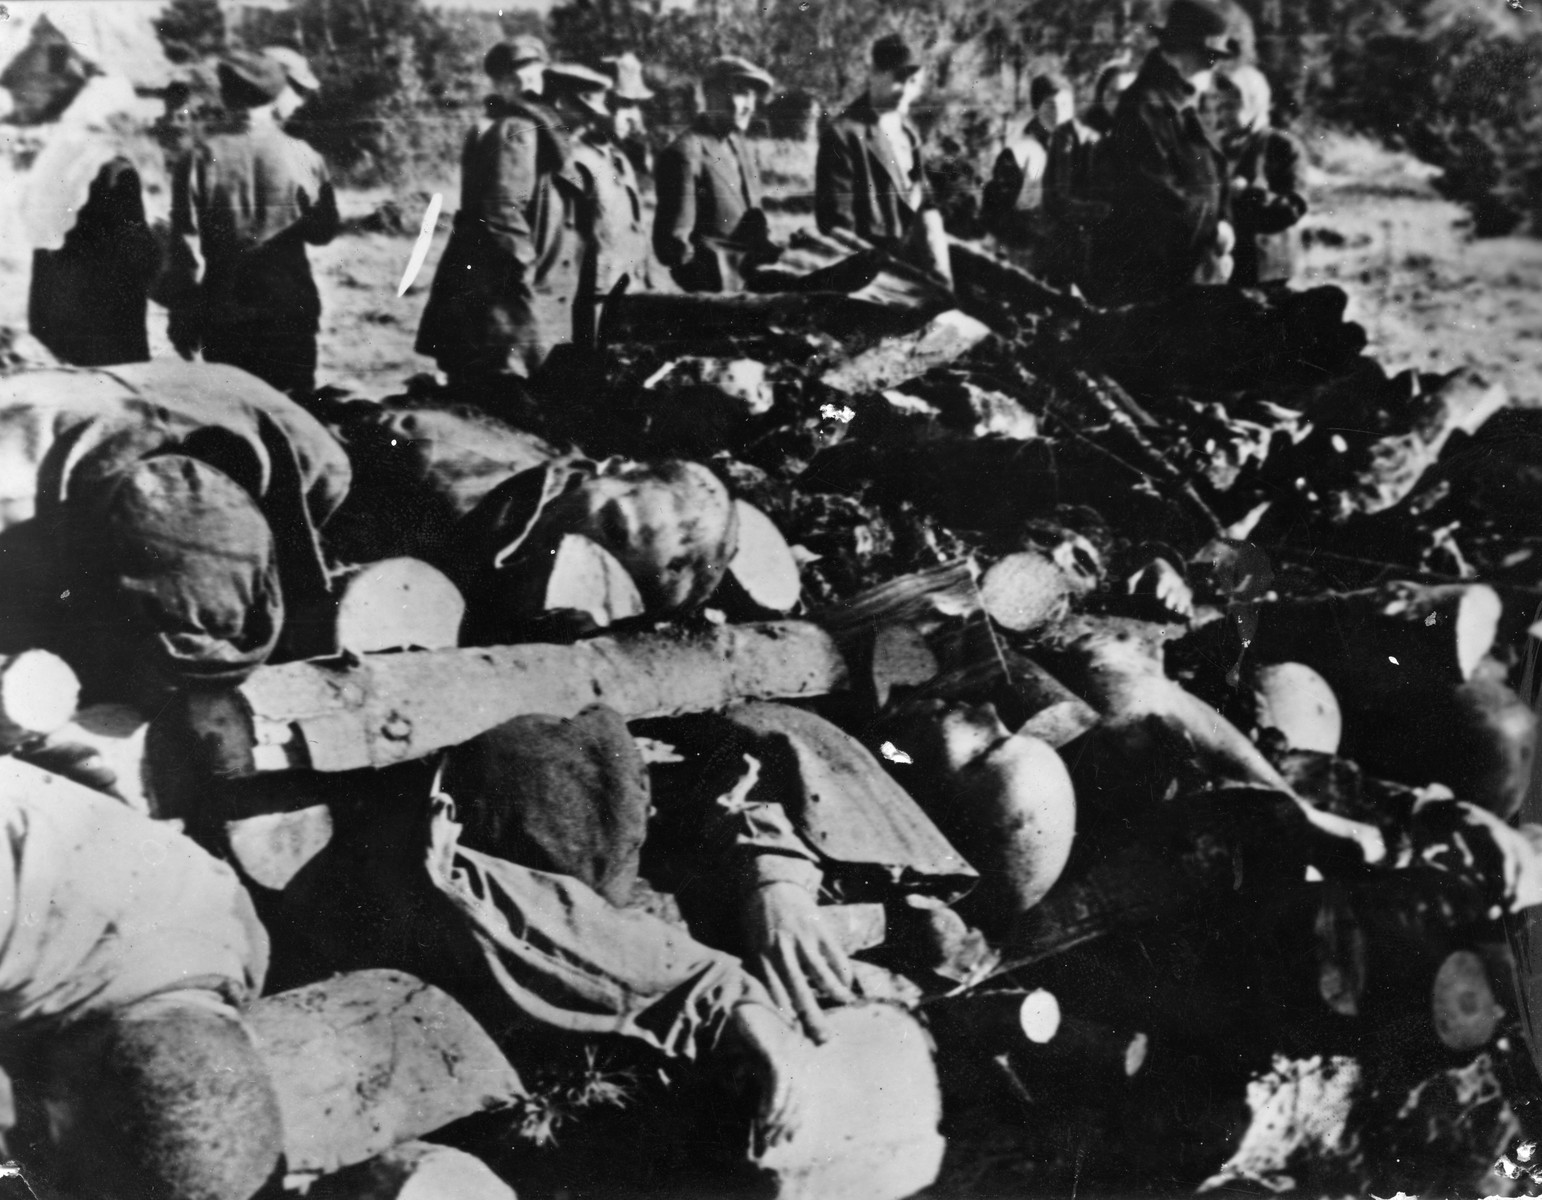 Members of a Soviet war crimes investigation commission view the bodies of slain prisoners which have been stacked for burning.